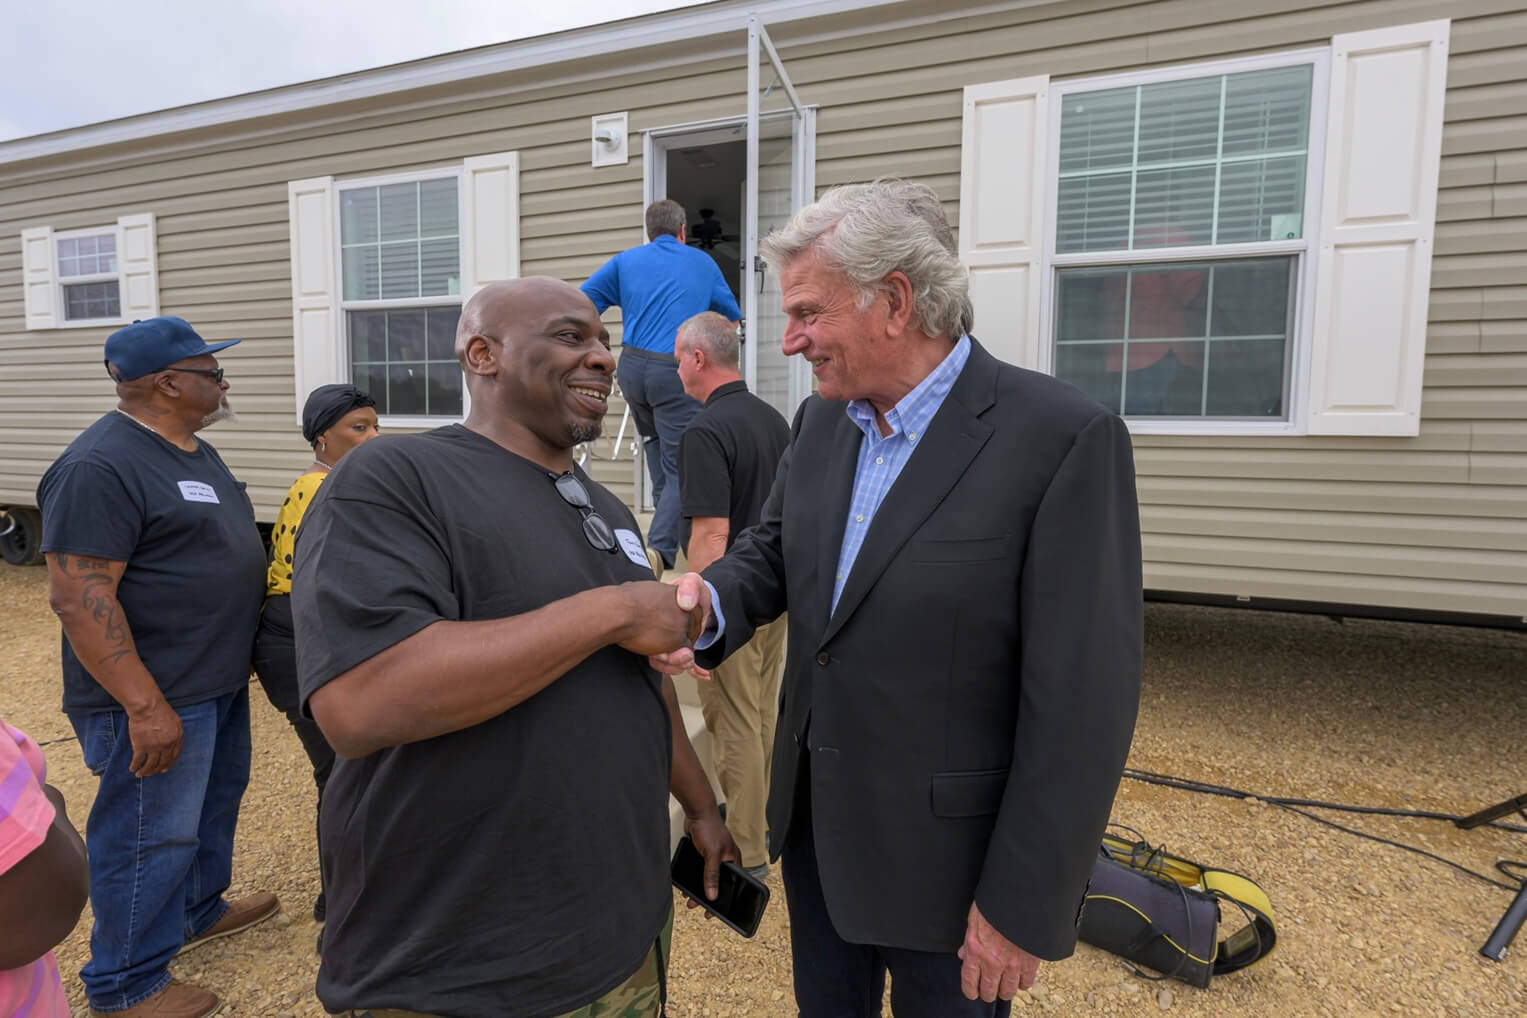 Tony Garth celebrated with Franklin Graham about moving into his new home soon.